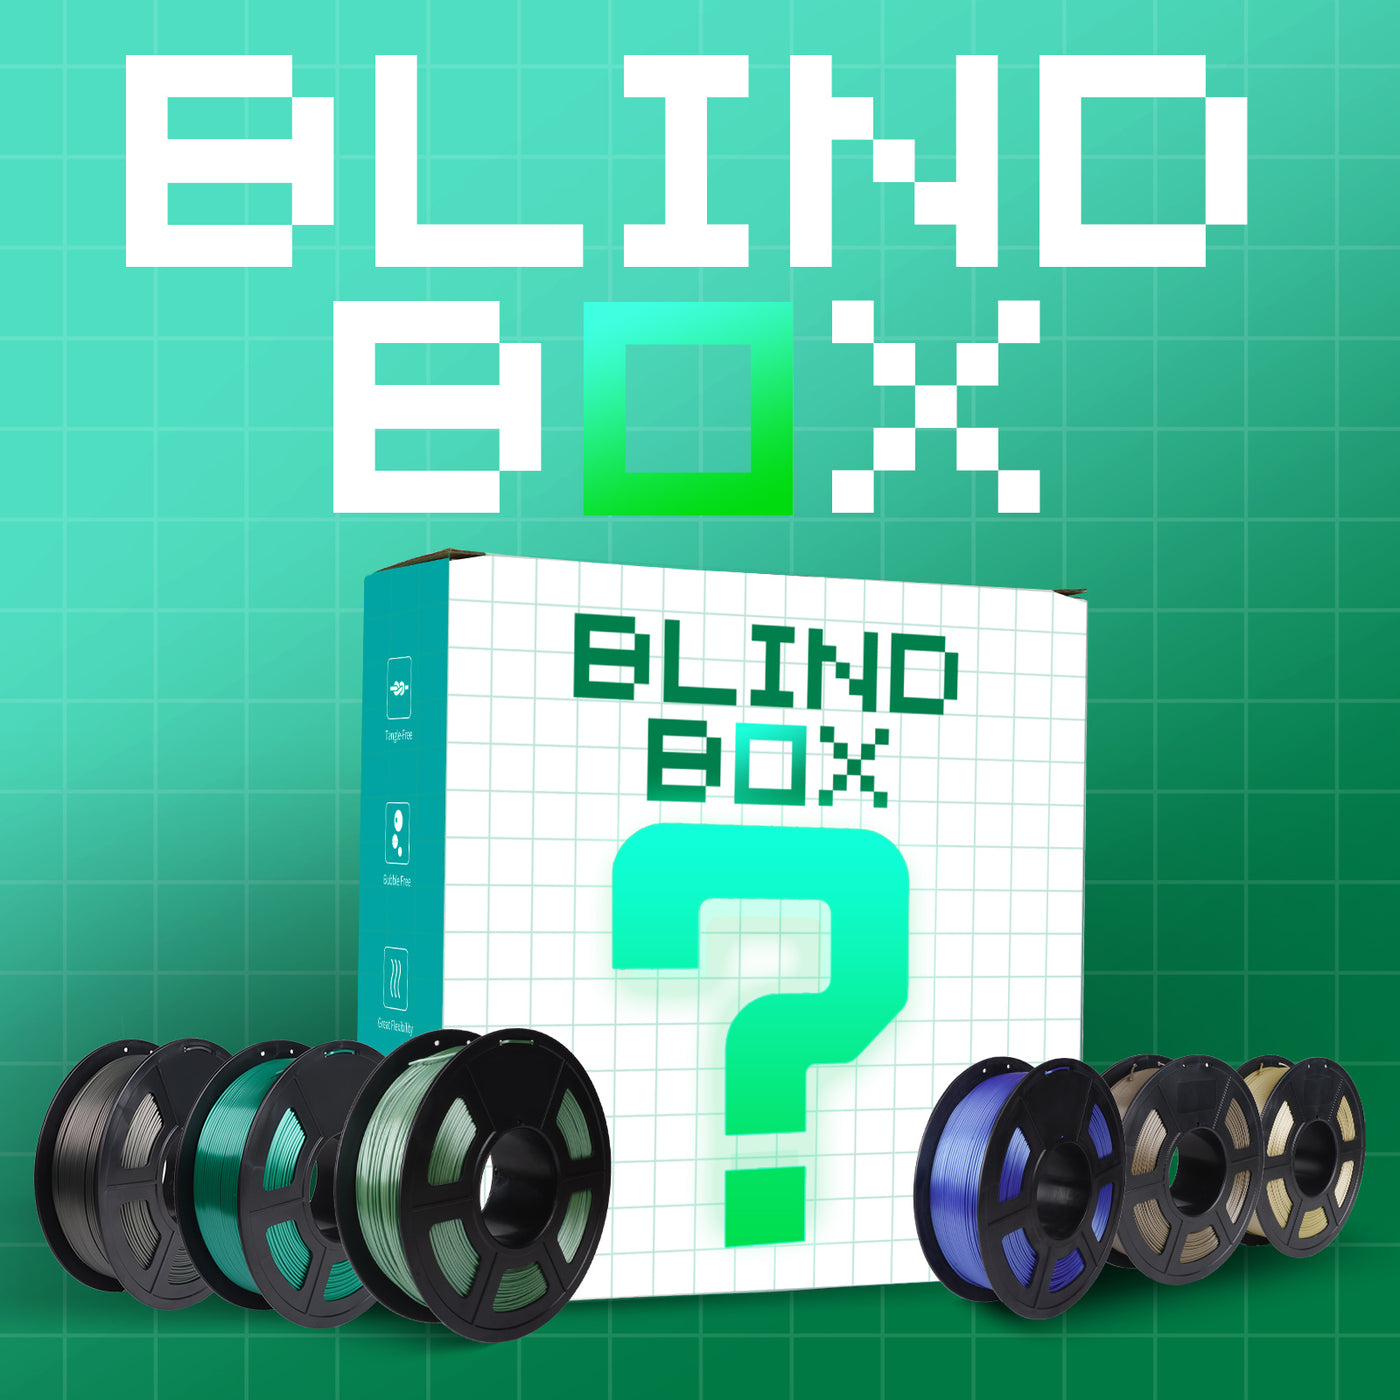 SUNLU SILK blind box officially launched!